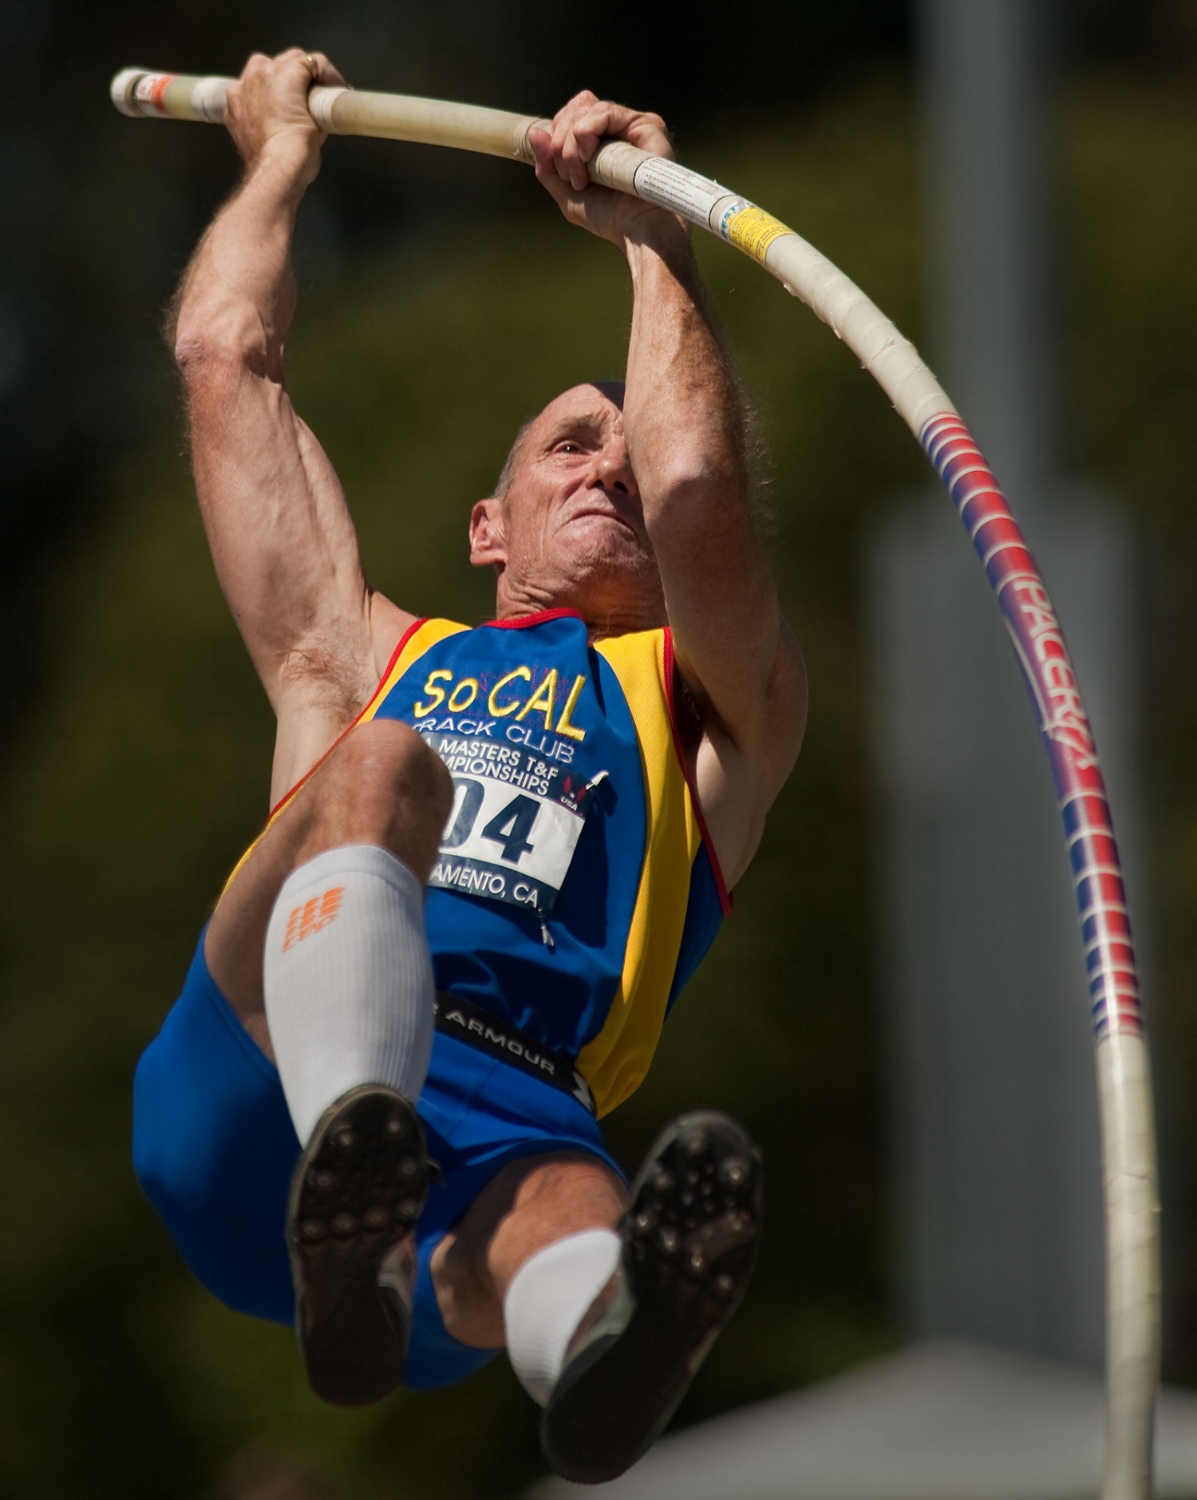  Kirk Bentz 55 competes in the pole vault during the Masters Track and Field championship at Sac State in Sacramento on Saturday, July 24, 2010. Bentz finished second with a vault of 12' 11.5". 